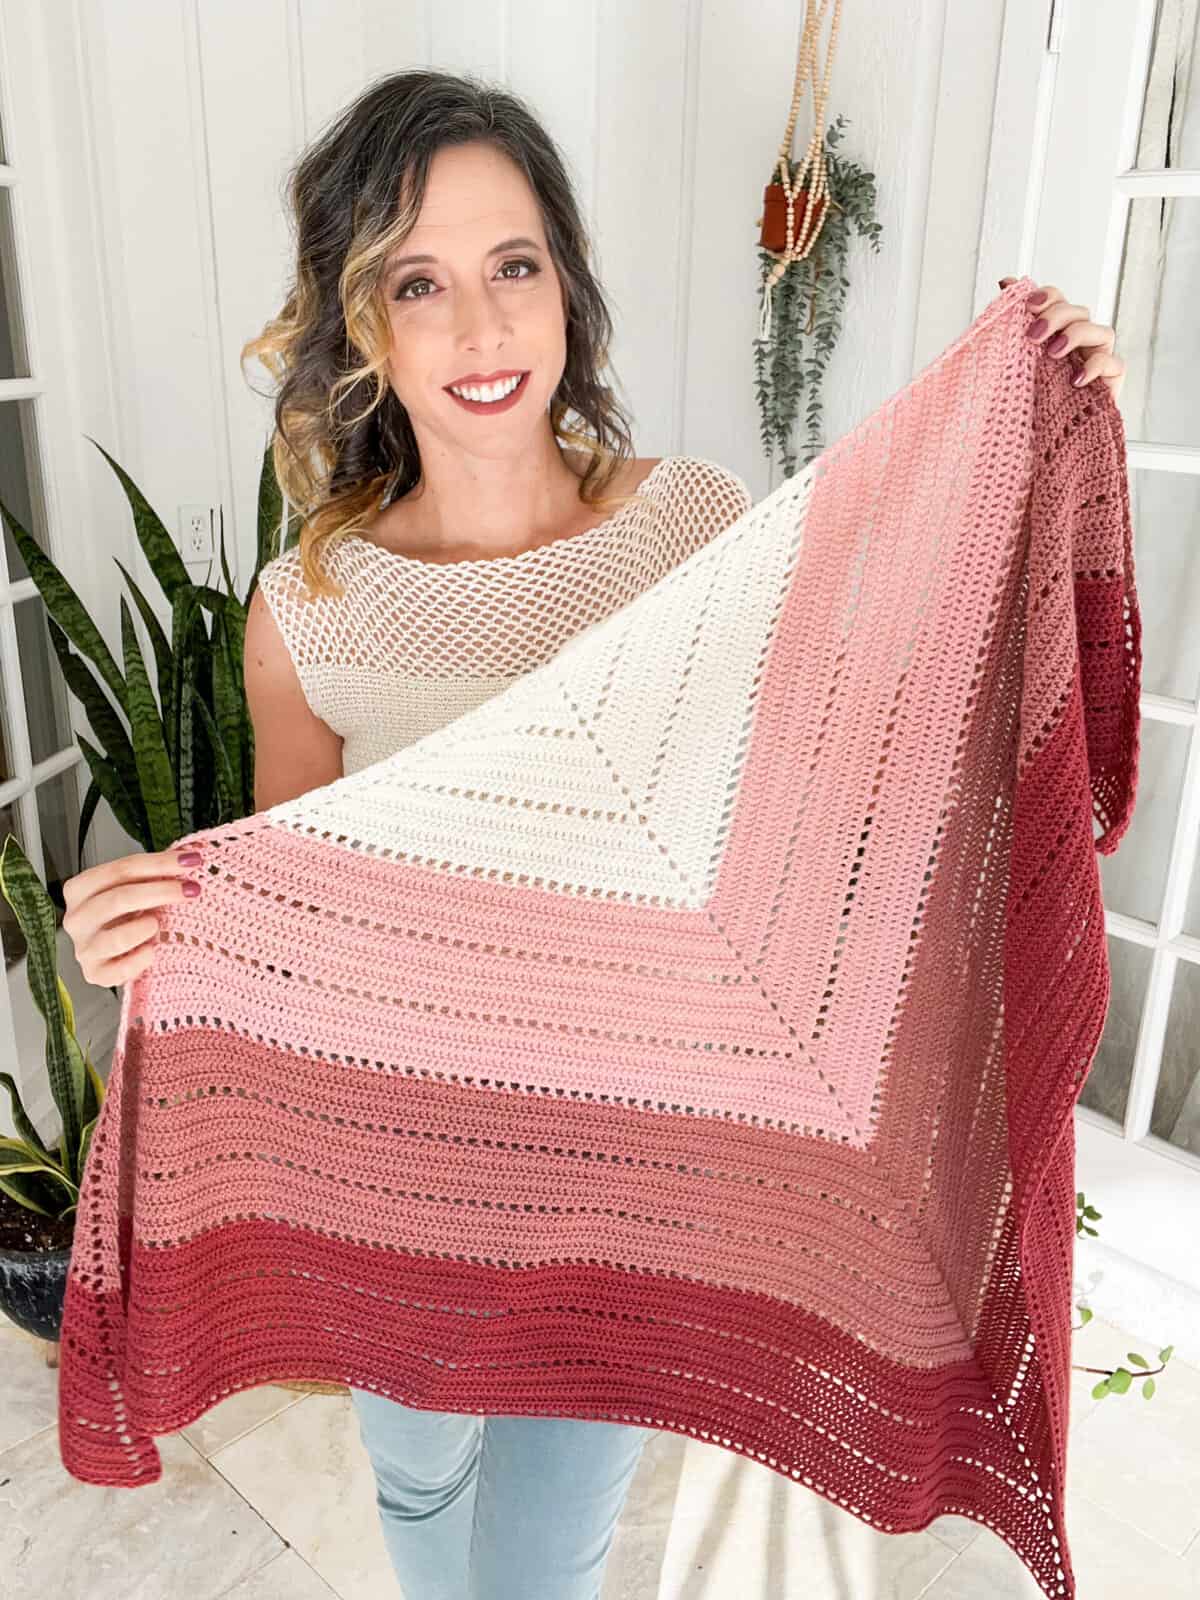 This Should Be Your First Triangle Crochet Shawl Free Pattern